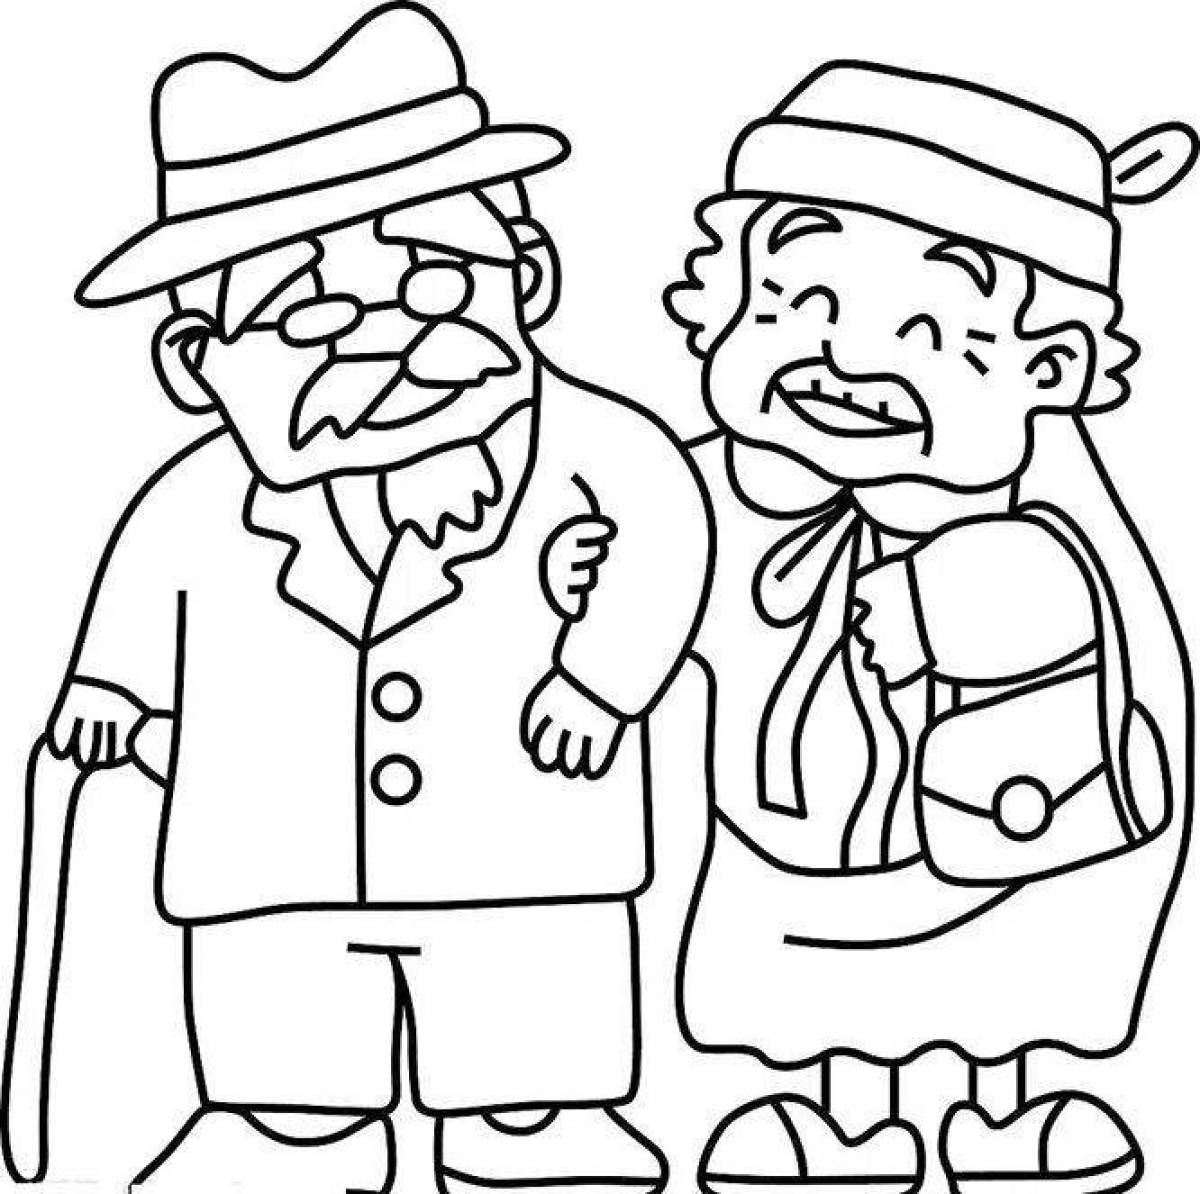 An entertaining coloring book for the elderly